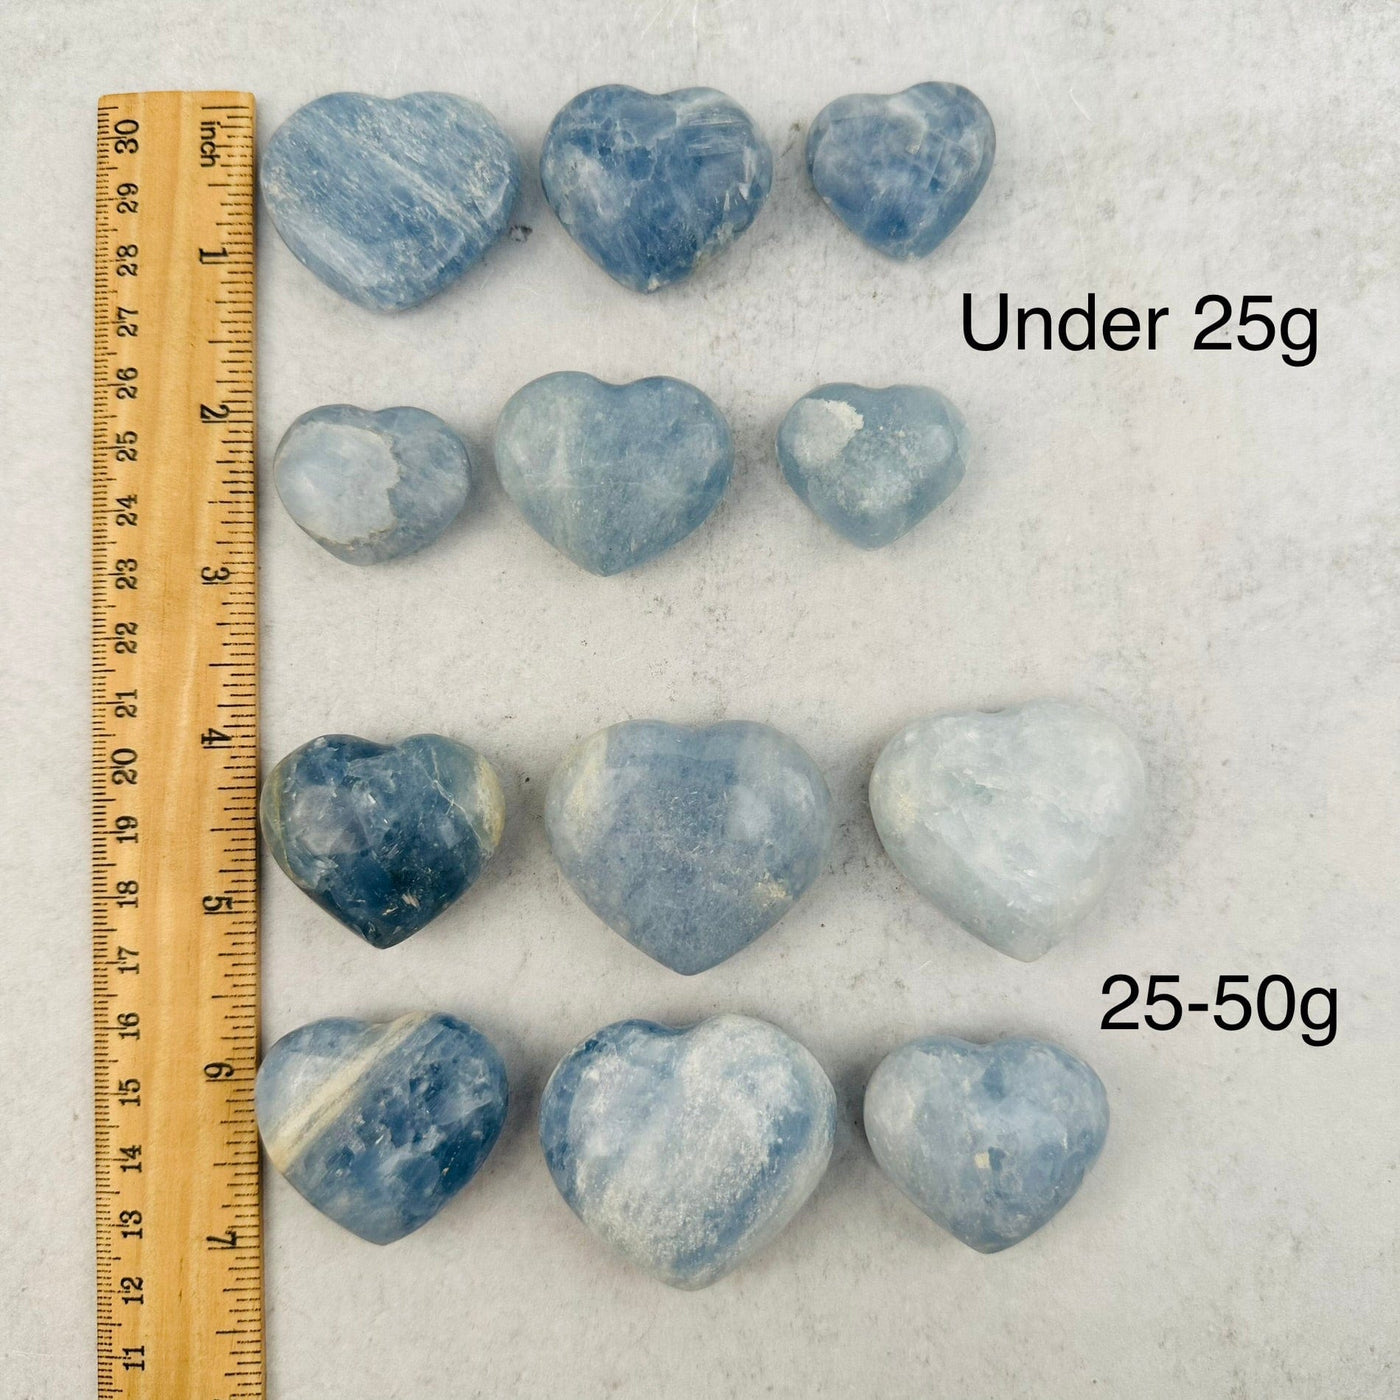 Blue Calcite Heart - CHOOSE WEIGHT - next to a ruler for size reference 